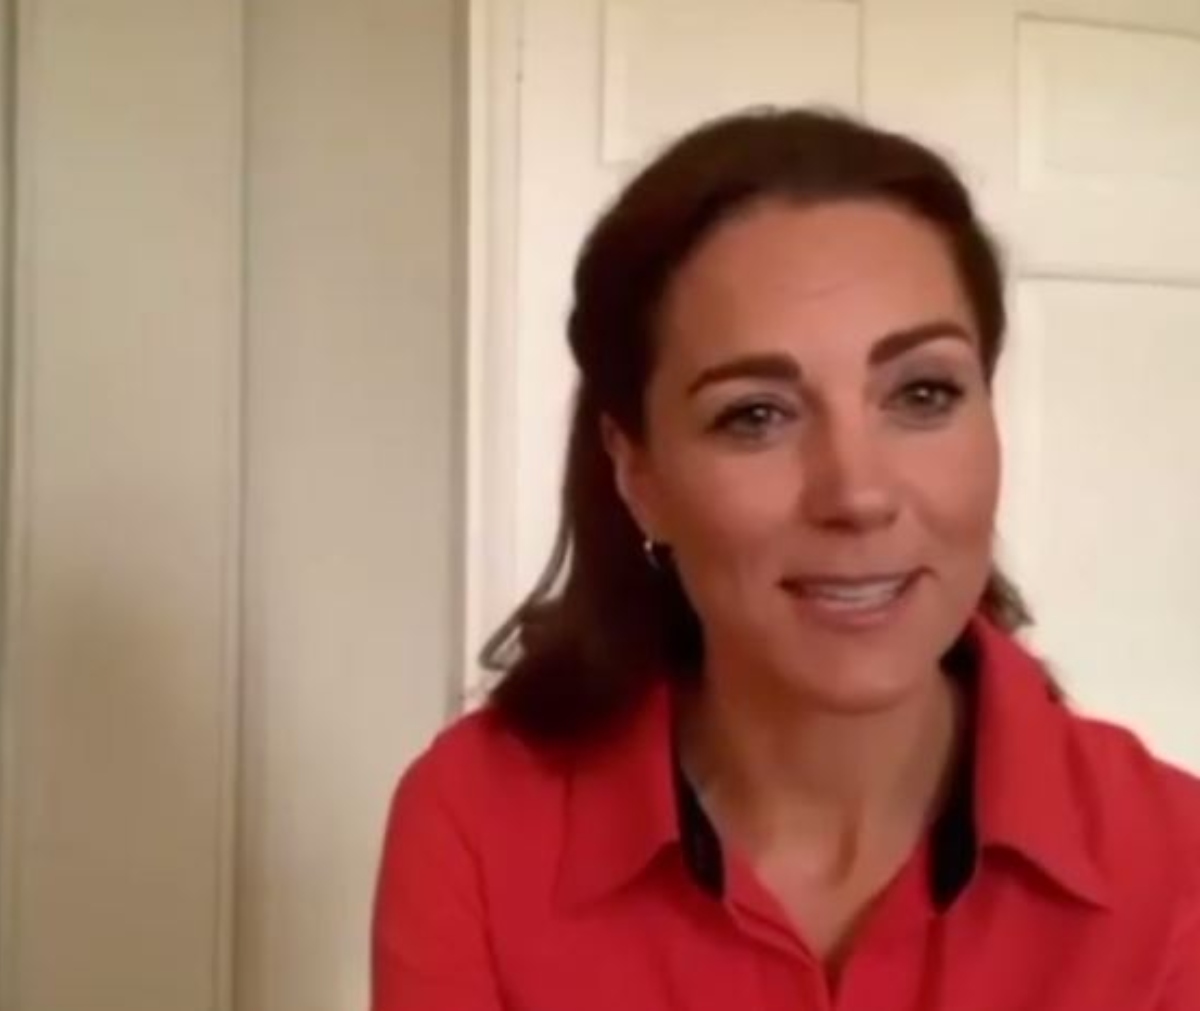 Duchess Catherine radiates red in a surprise “virtual tour” for a meaningful cause